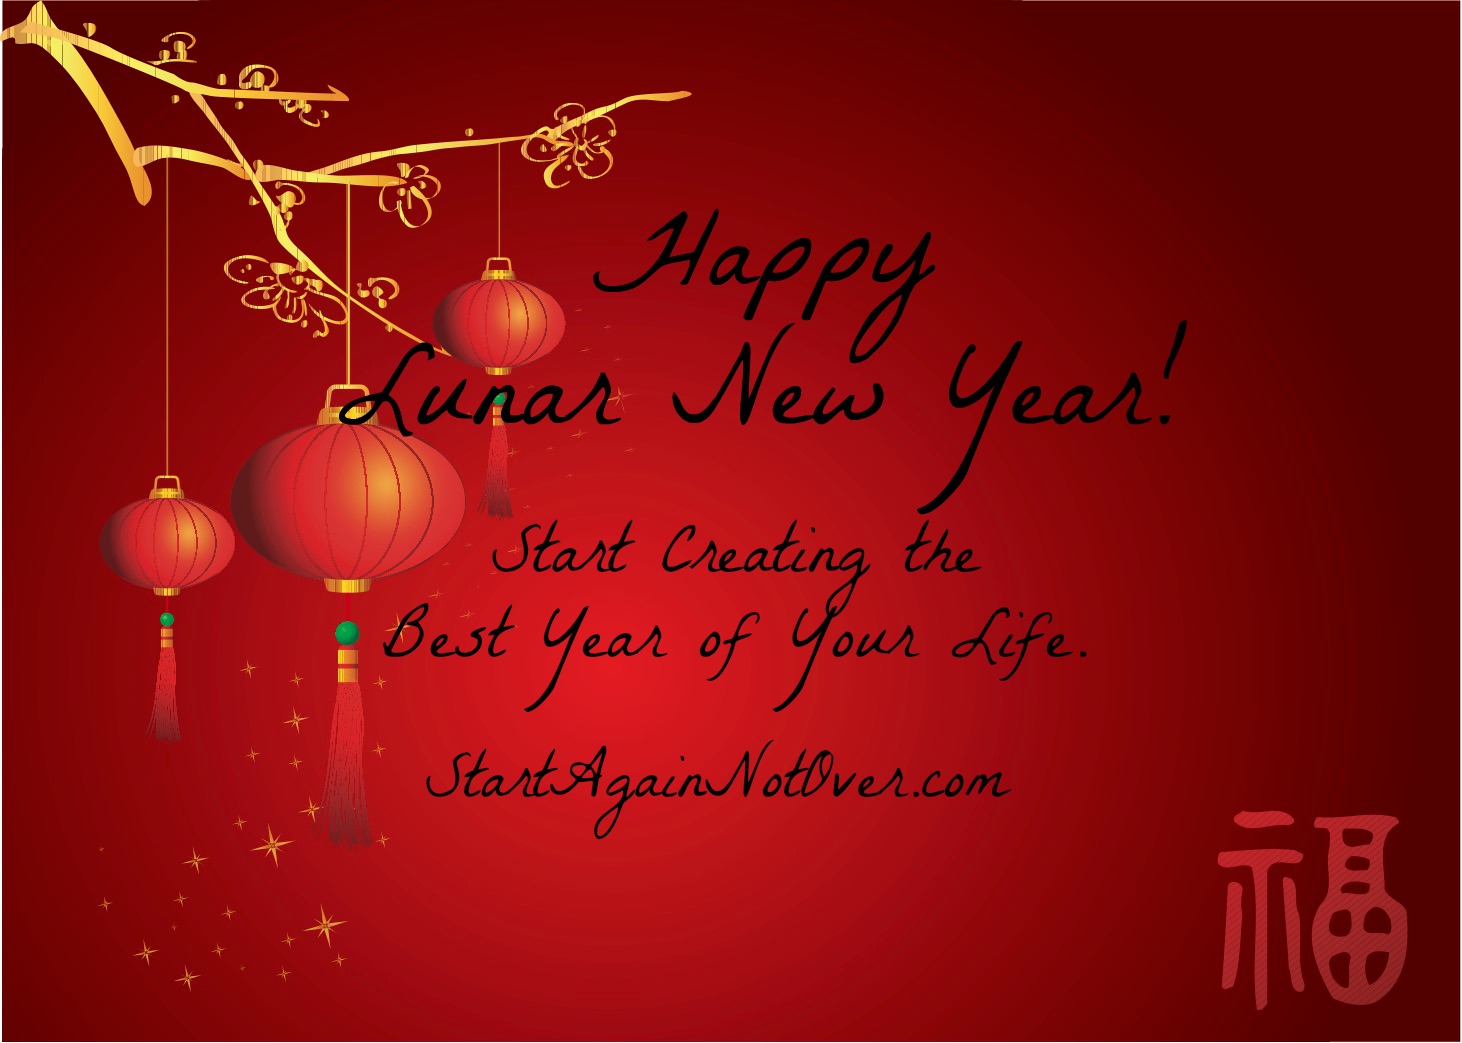 Happy Lunar New Year! Start Creating the Best Year of Your Life!